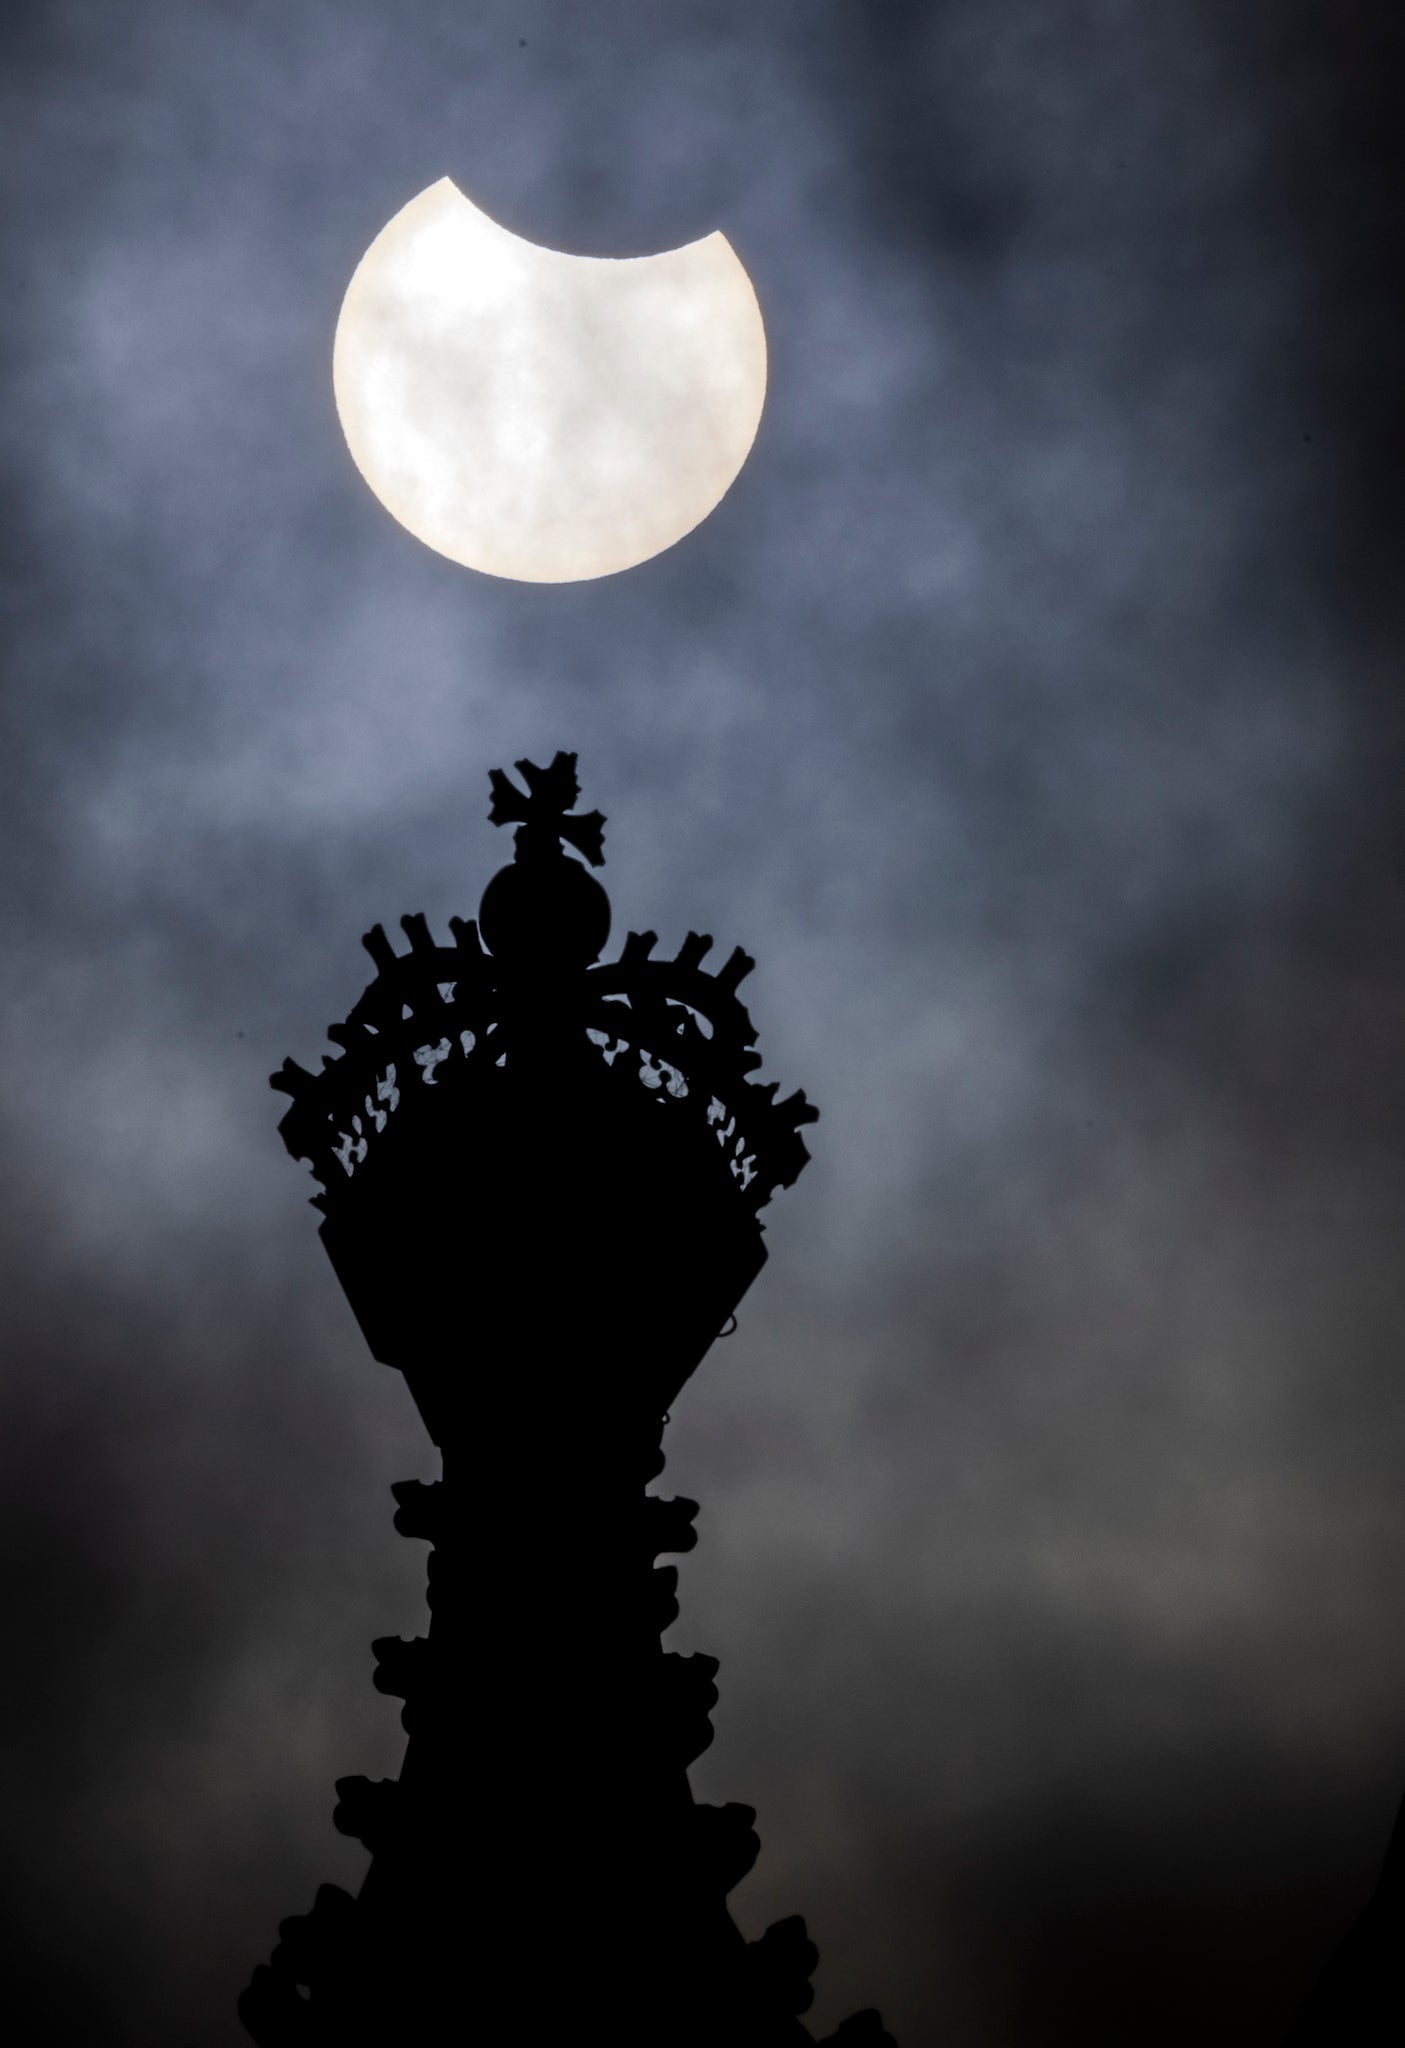 The partial eclipse over the Houses of Parliament